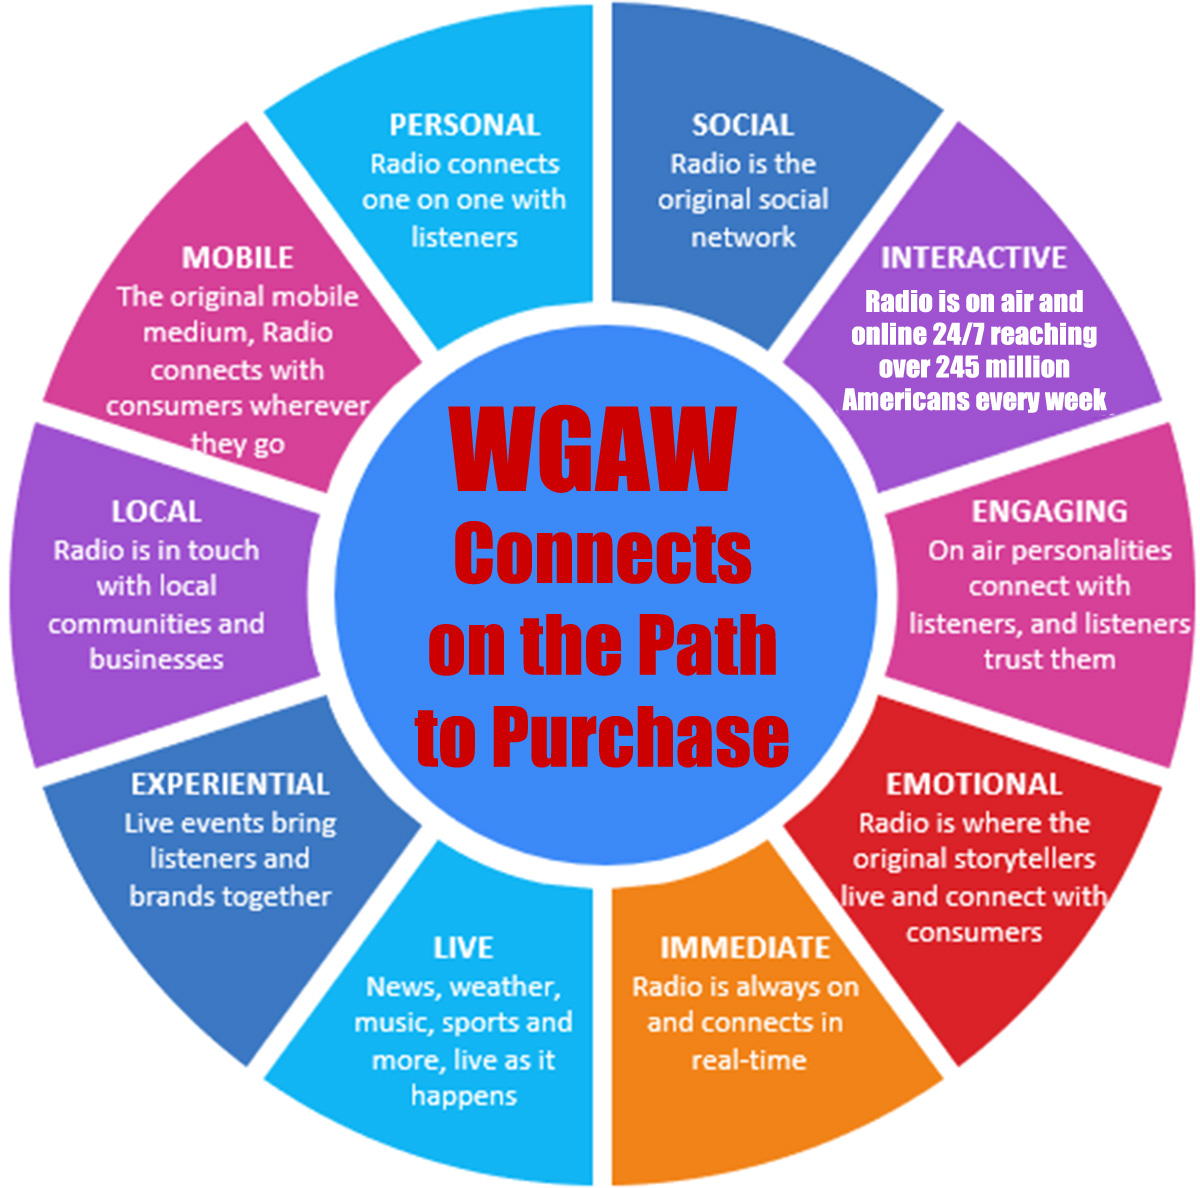 WGAW connects on the path to purchase